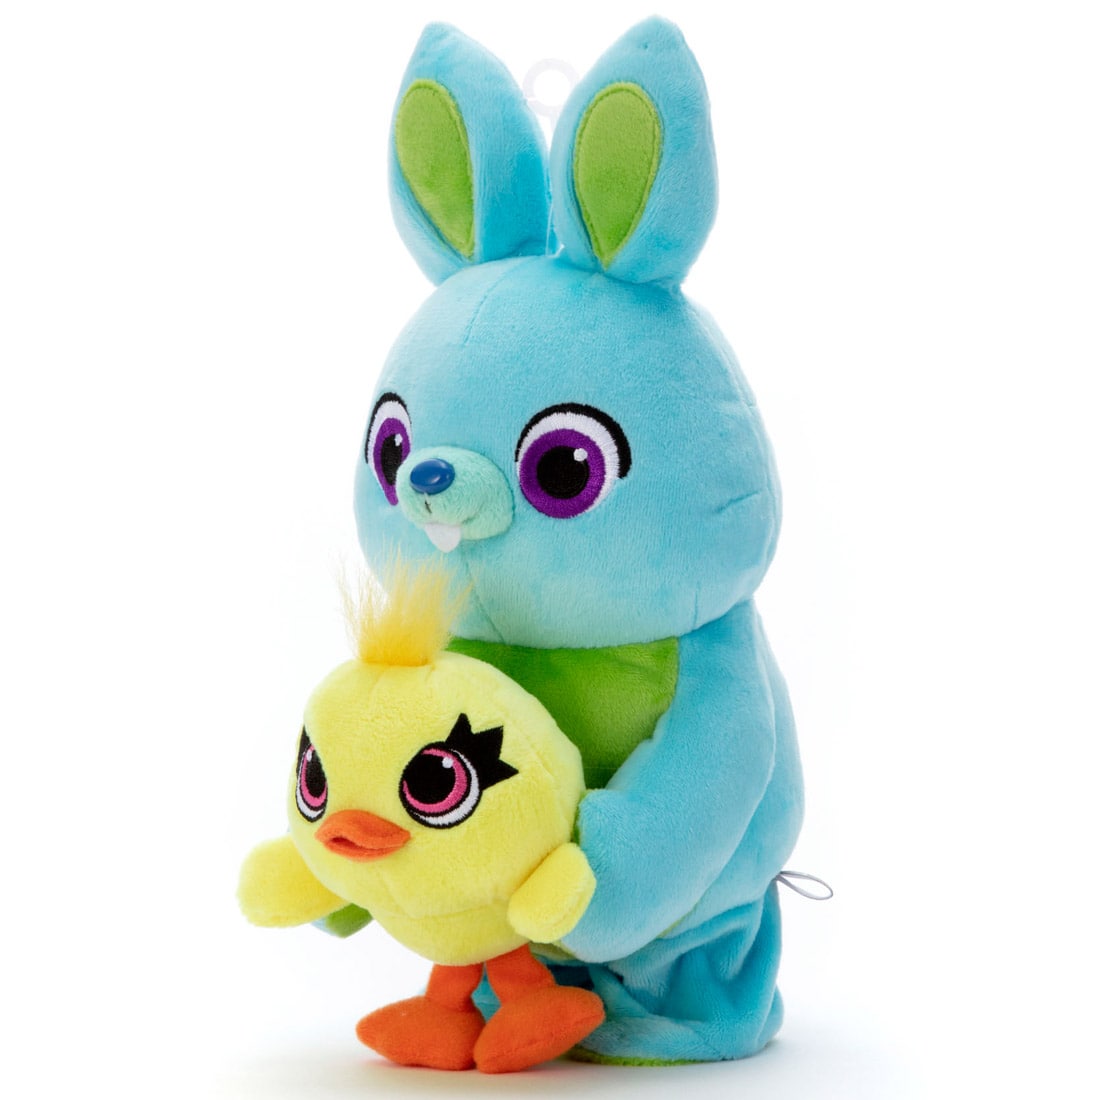 bunny and ducky plush